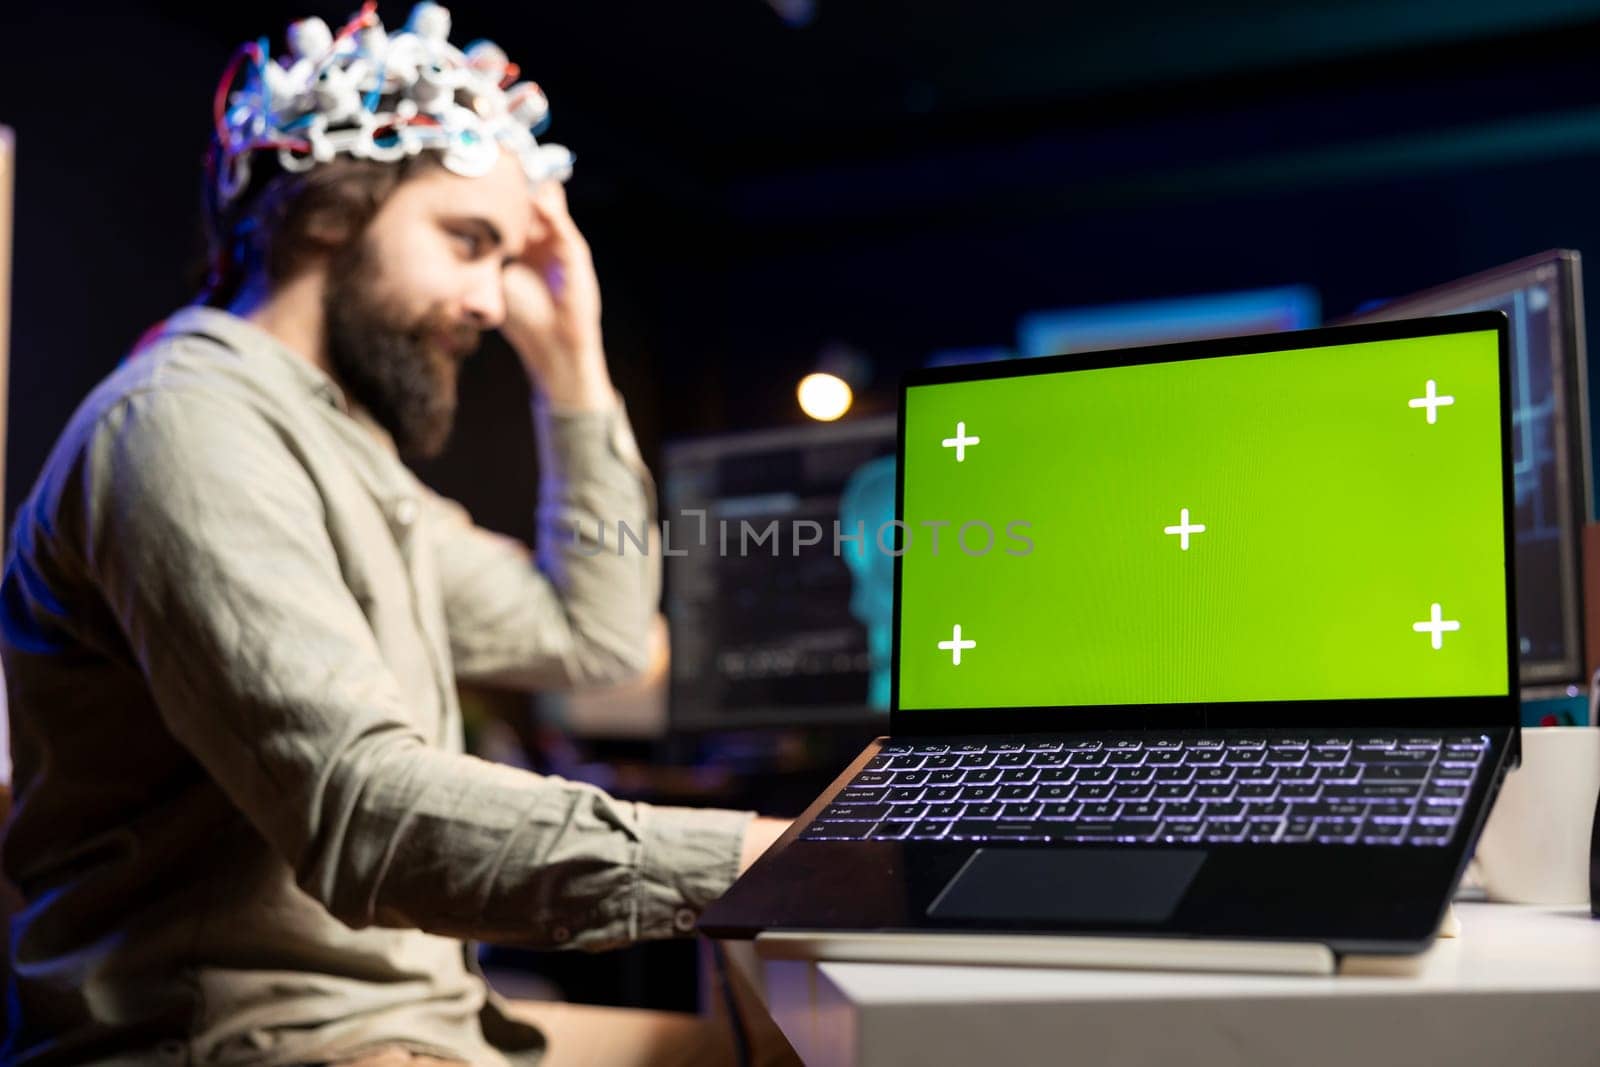 Focus on green screen laptop used by developer wearing EEG headset device translating thoughts into PC commands. IT professional controlling computer functions using mind, helped by mockup notebook